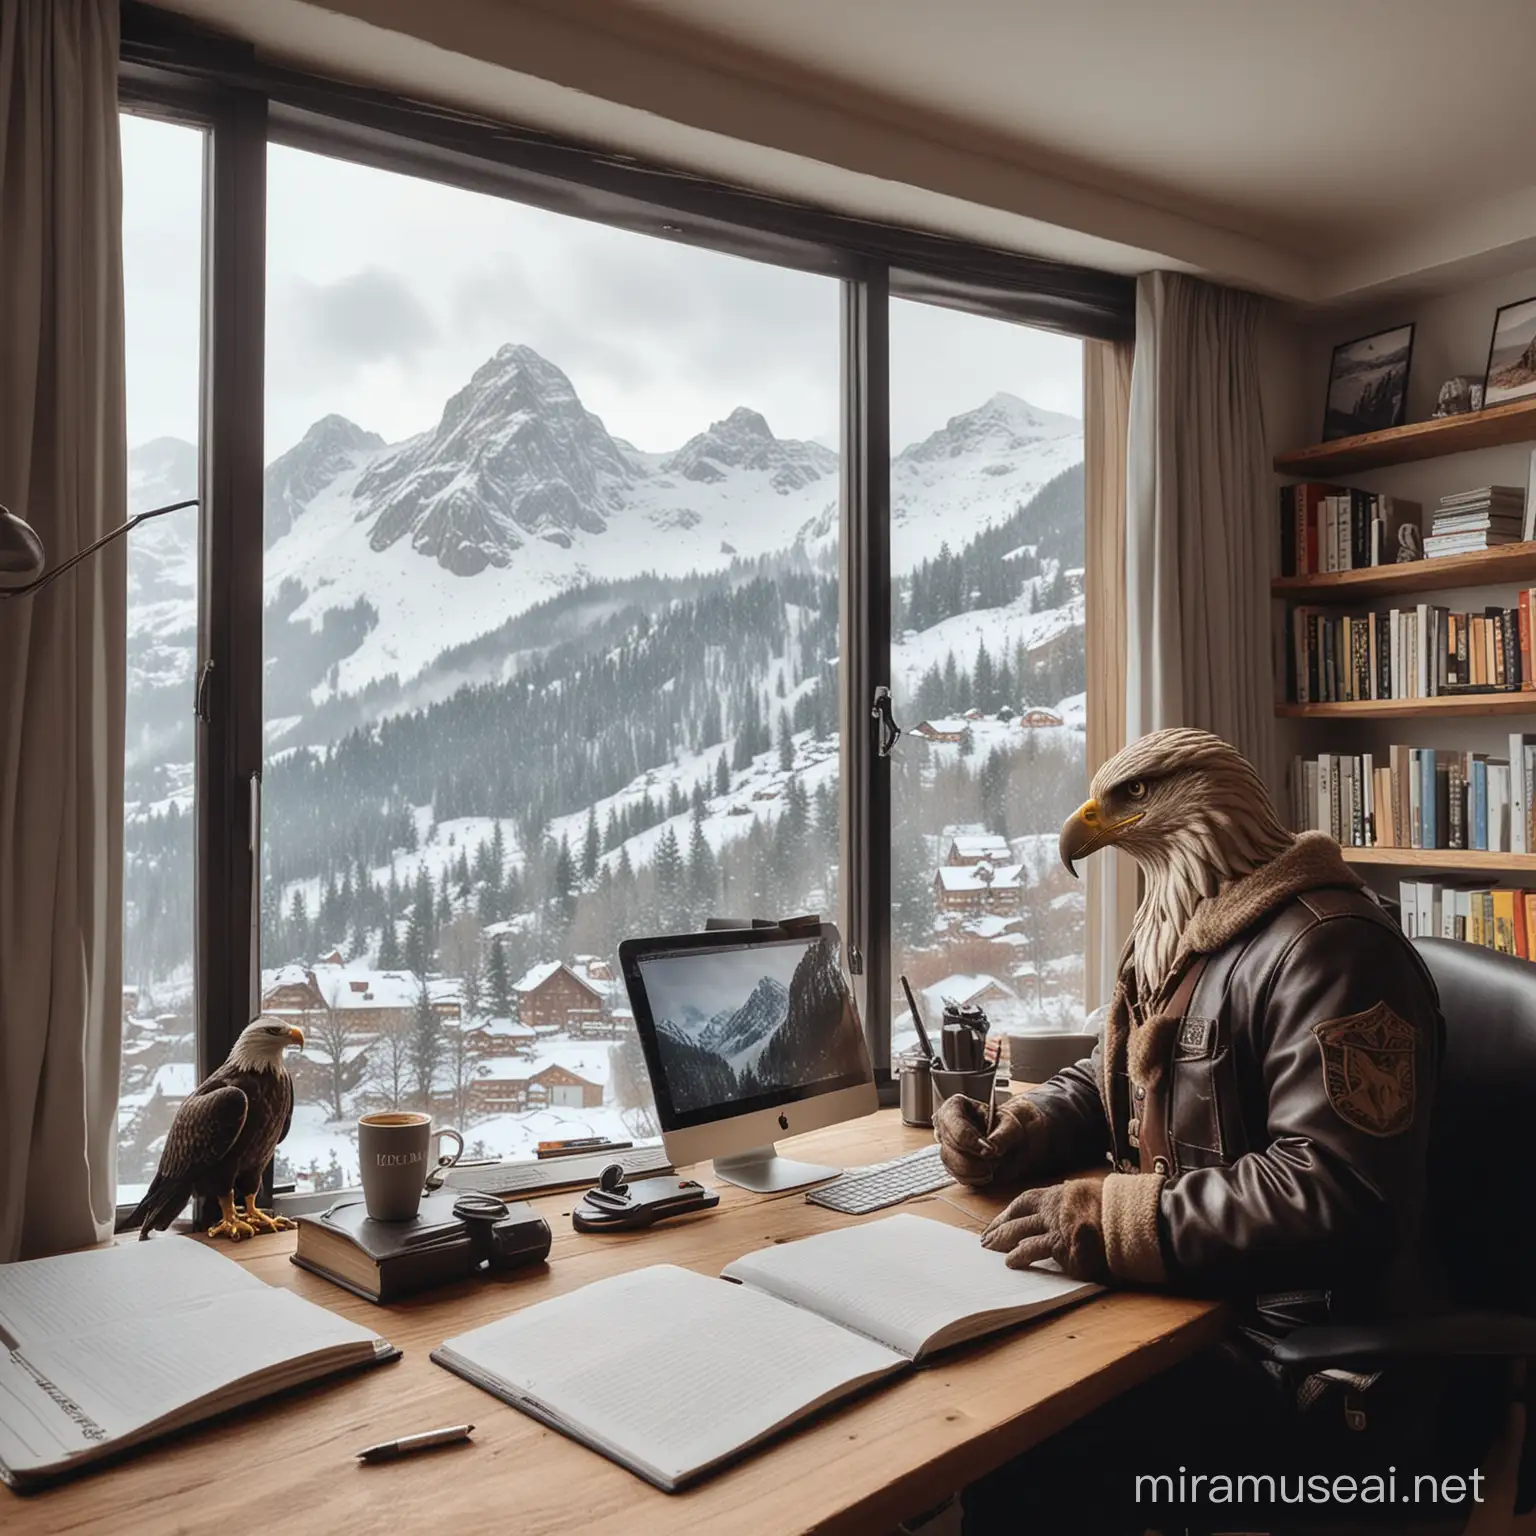 I want to make an image with a trader in front of two computer screens. Next to him he has a coffee mug, a notebook and a pen on it. On the wall of the room to have a bookcase with an eagle like statue on it. Outside the window of the room, a snowy alpine landscape can be seen

